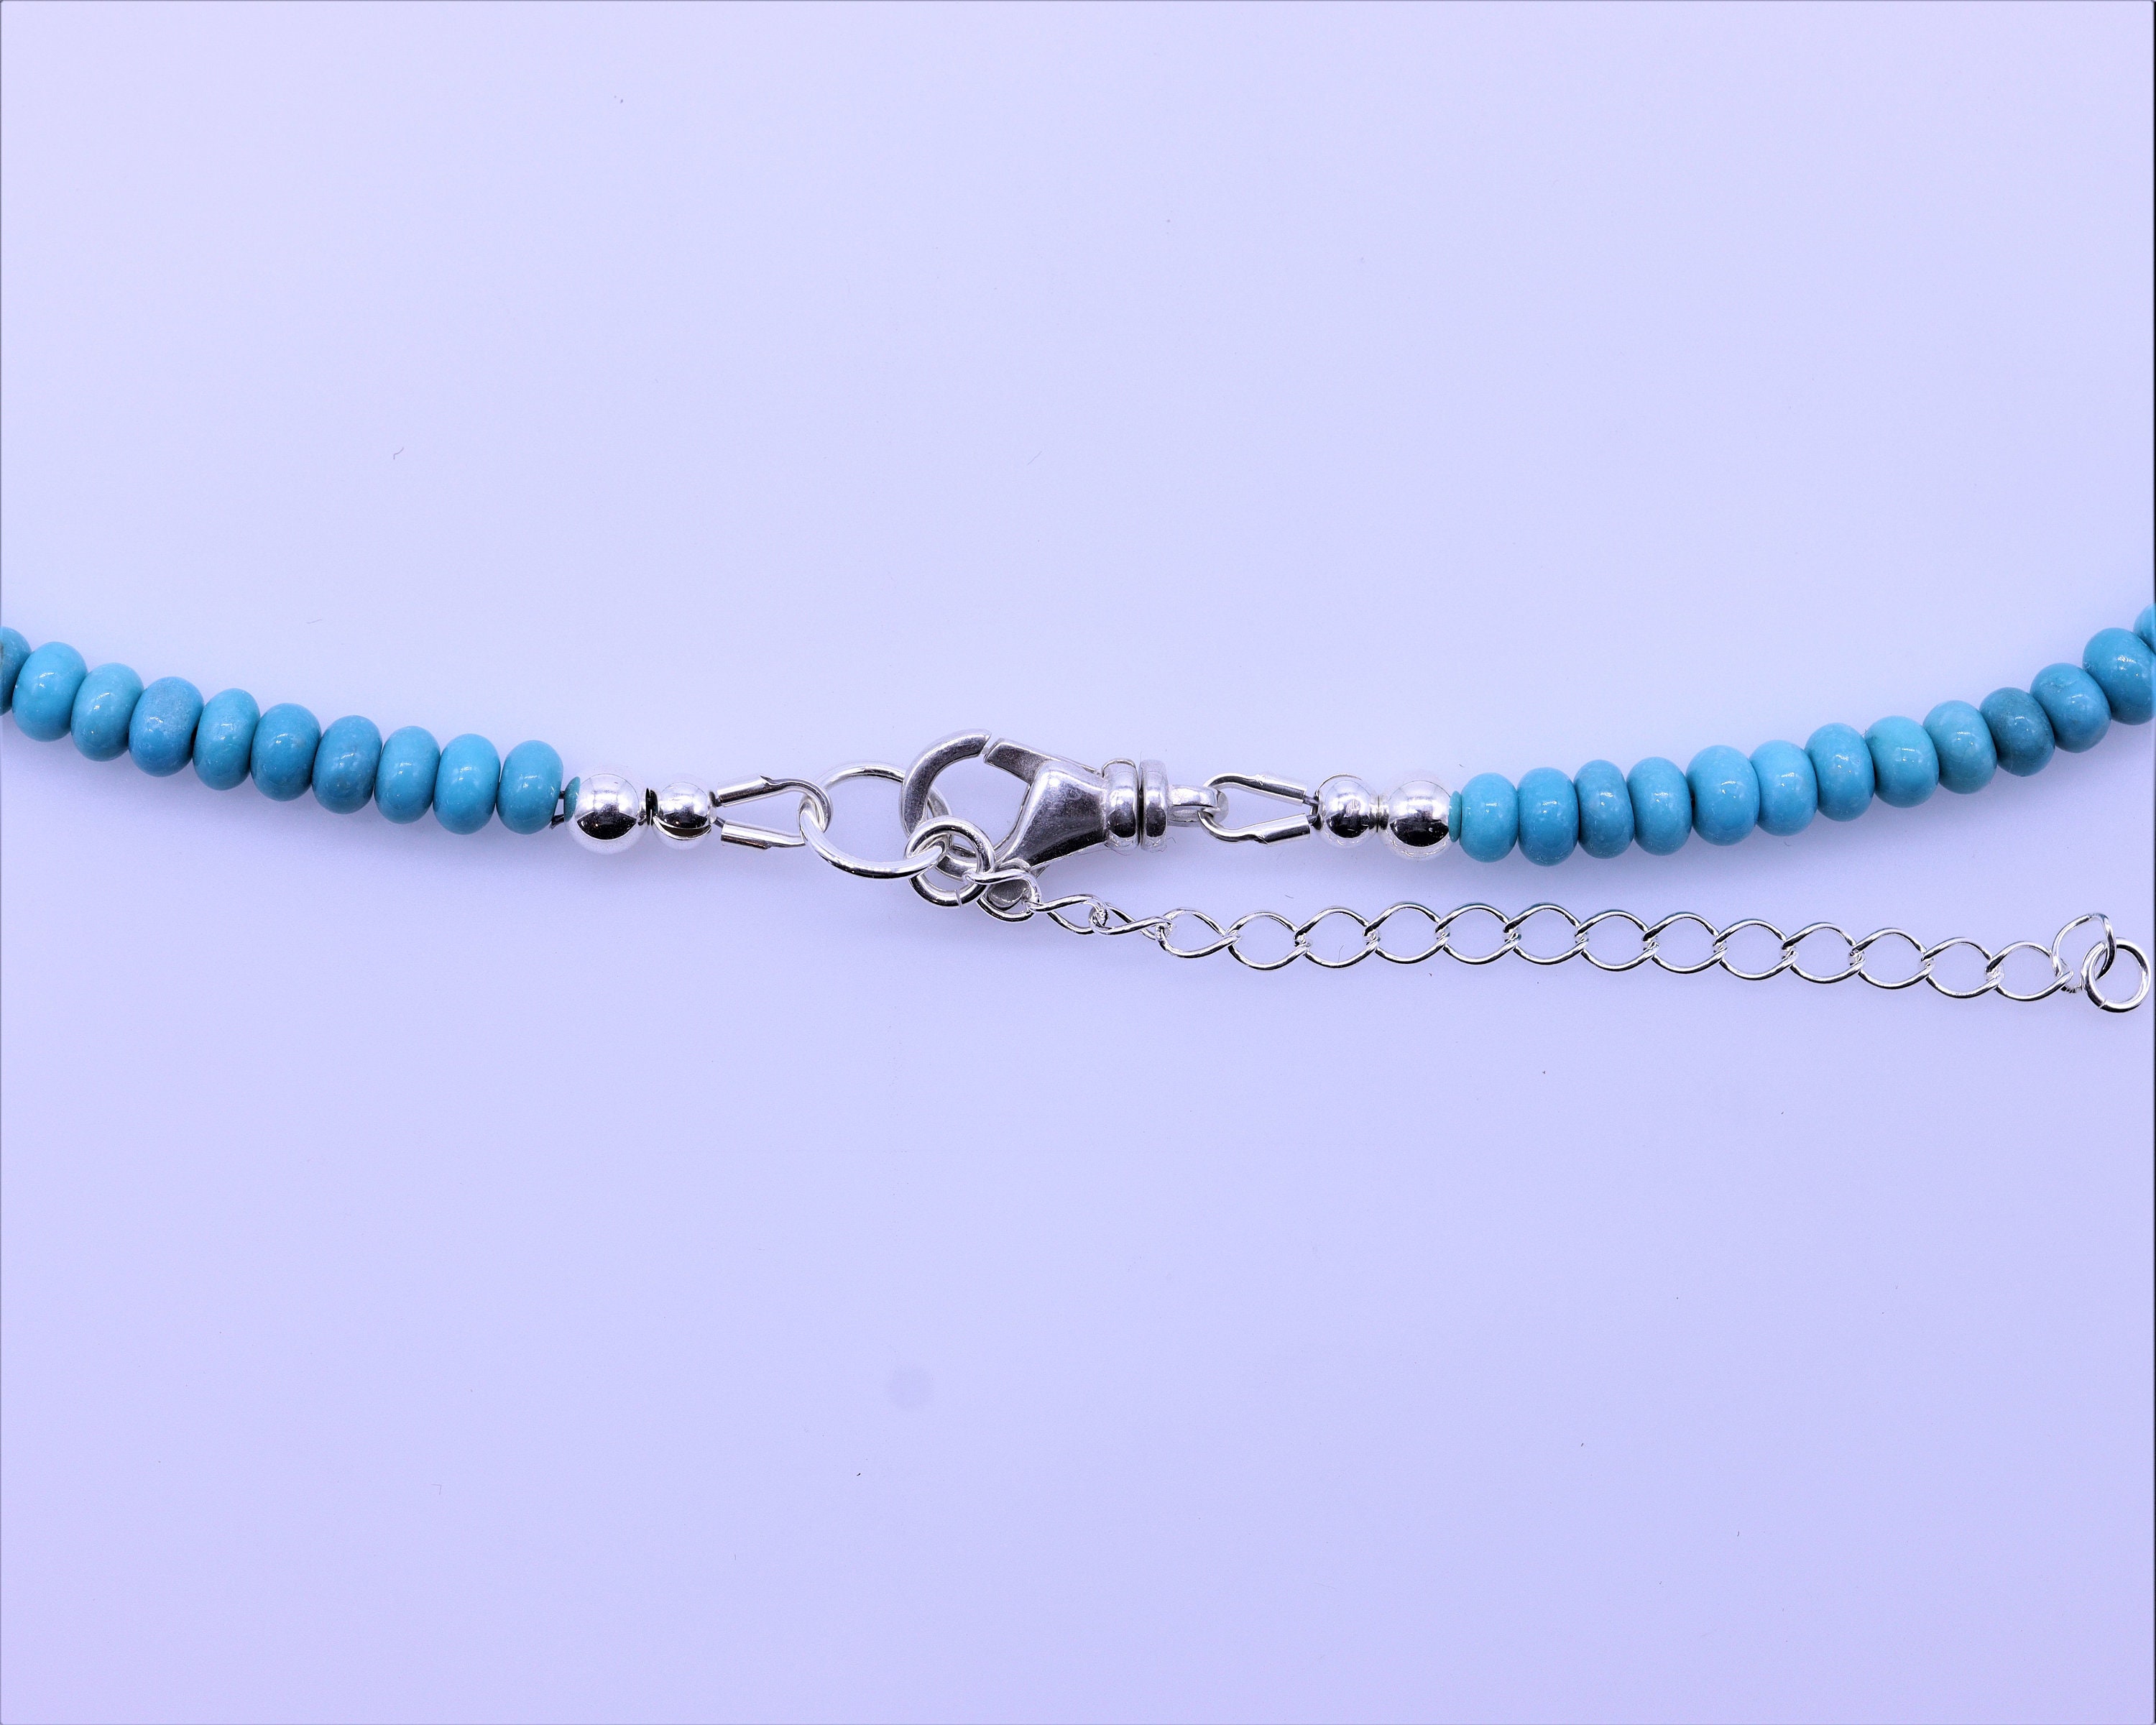 The Tullo Turquoise Ribbon Necklace, 4